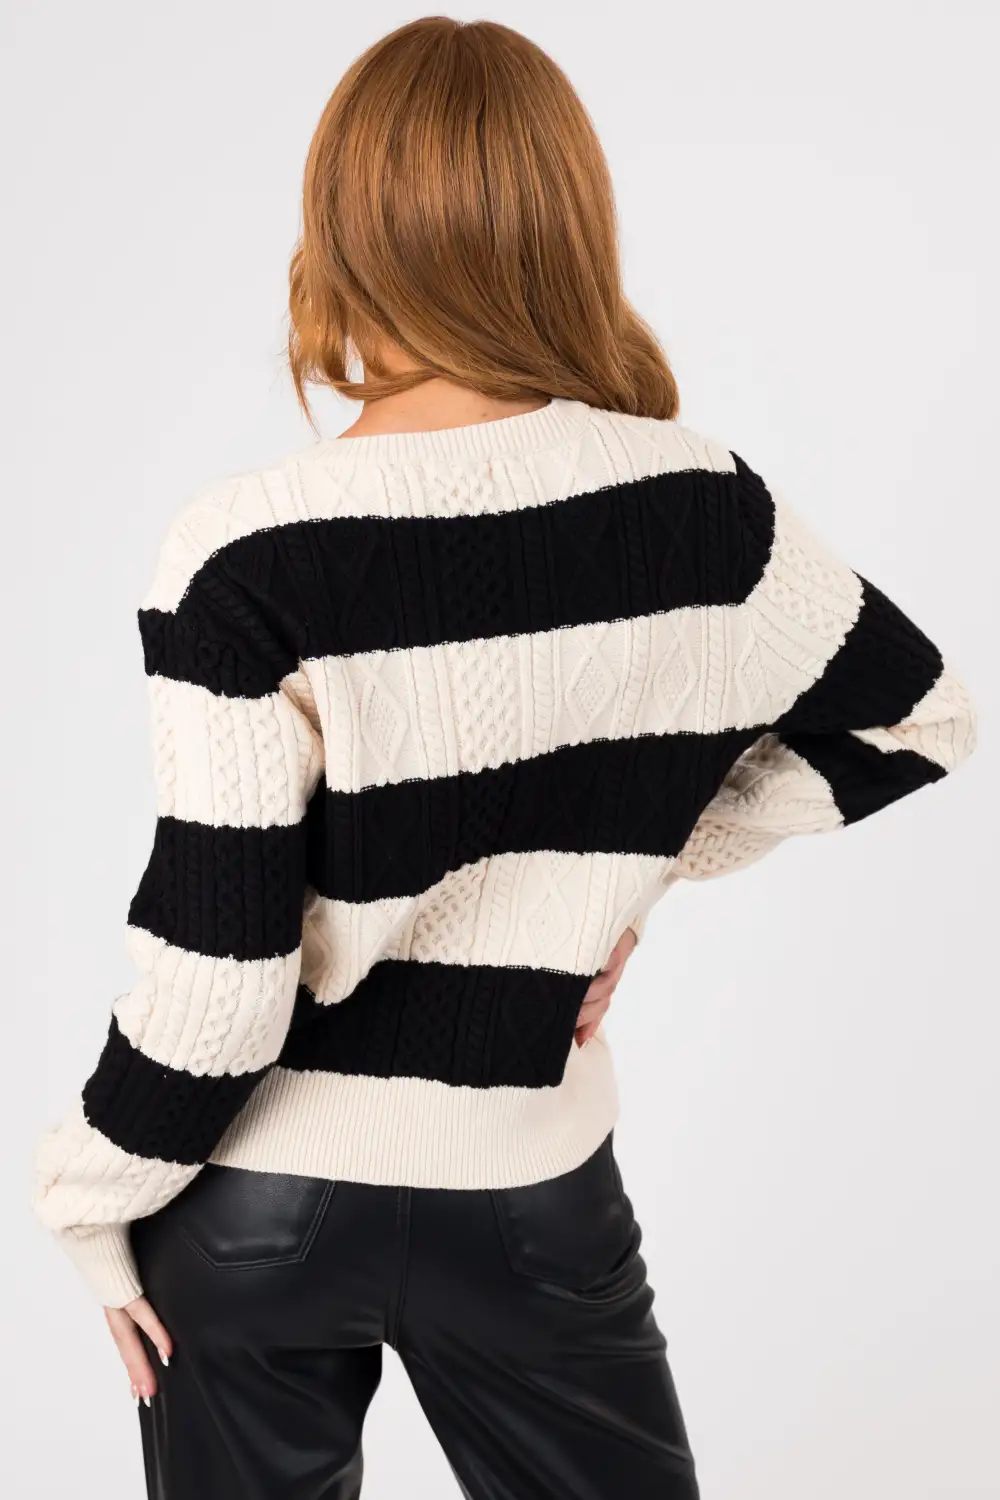 Black and Cream Striped Cable Knit Sweater